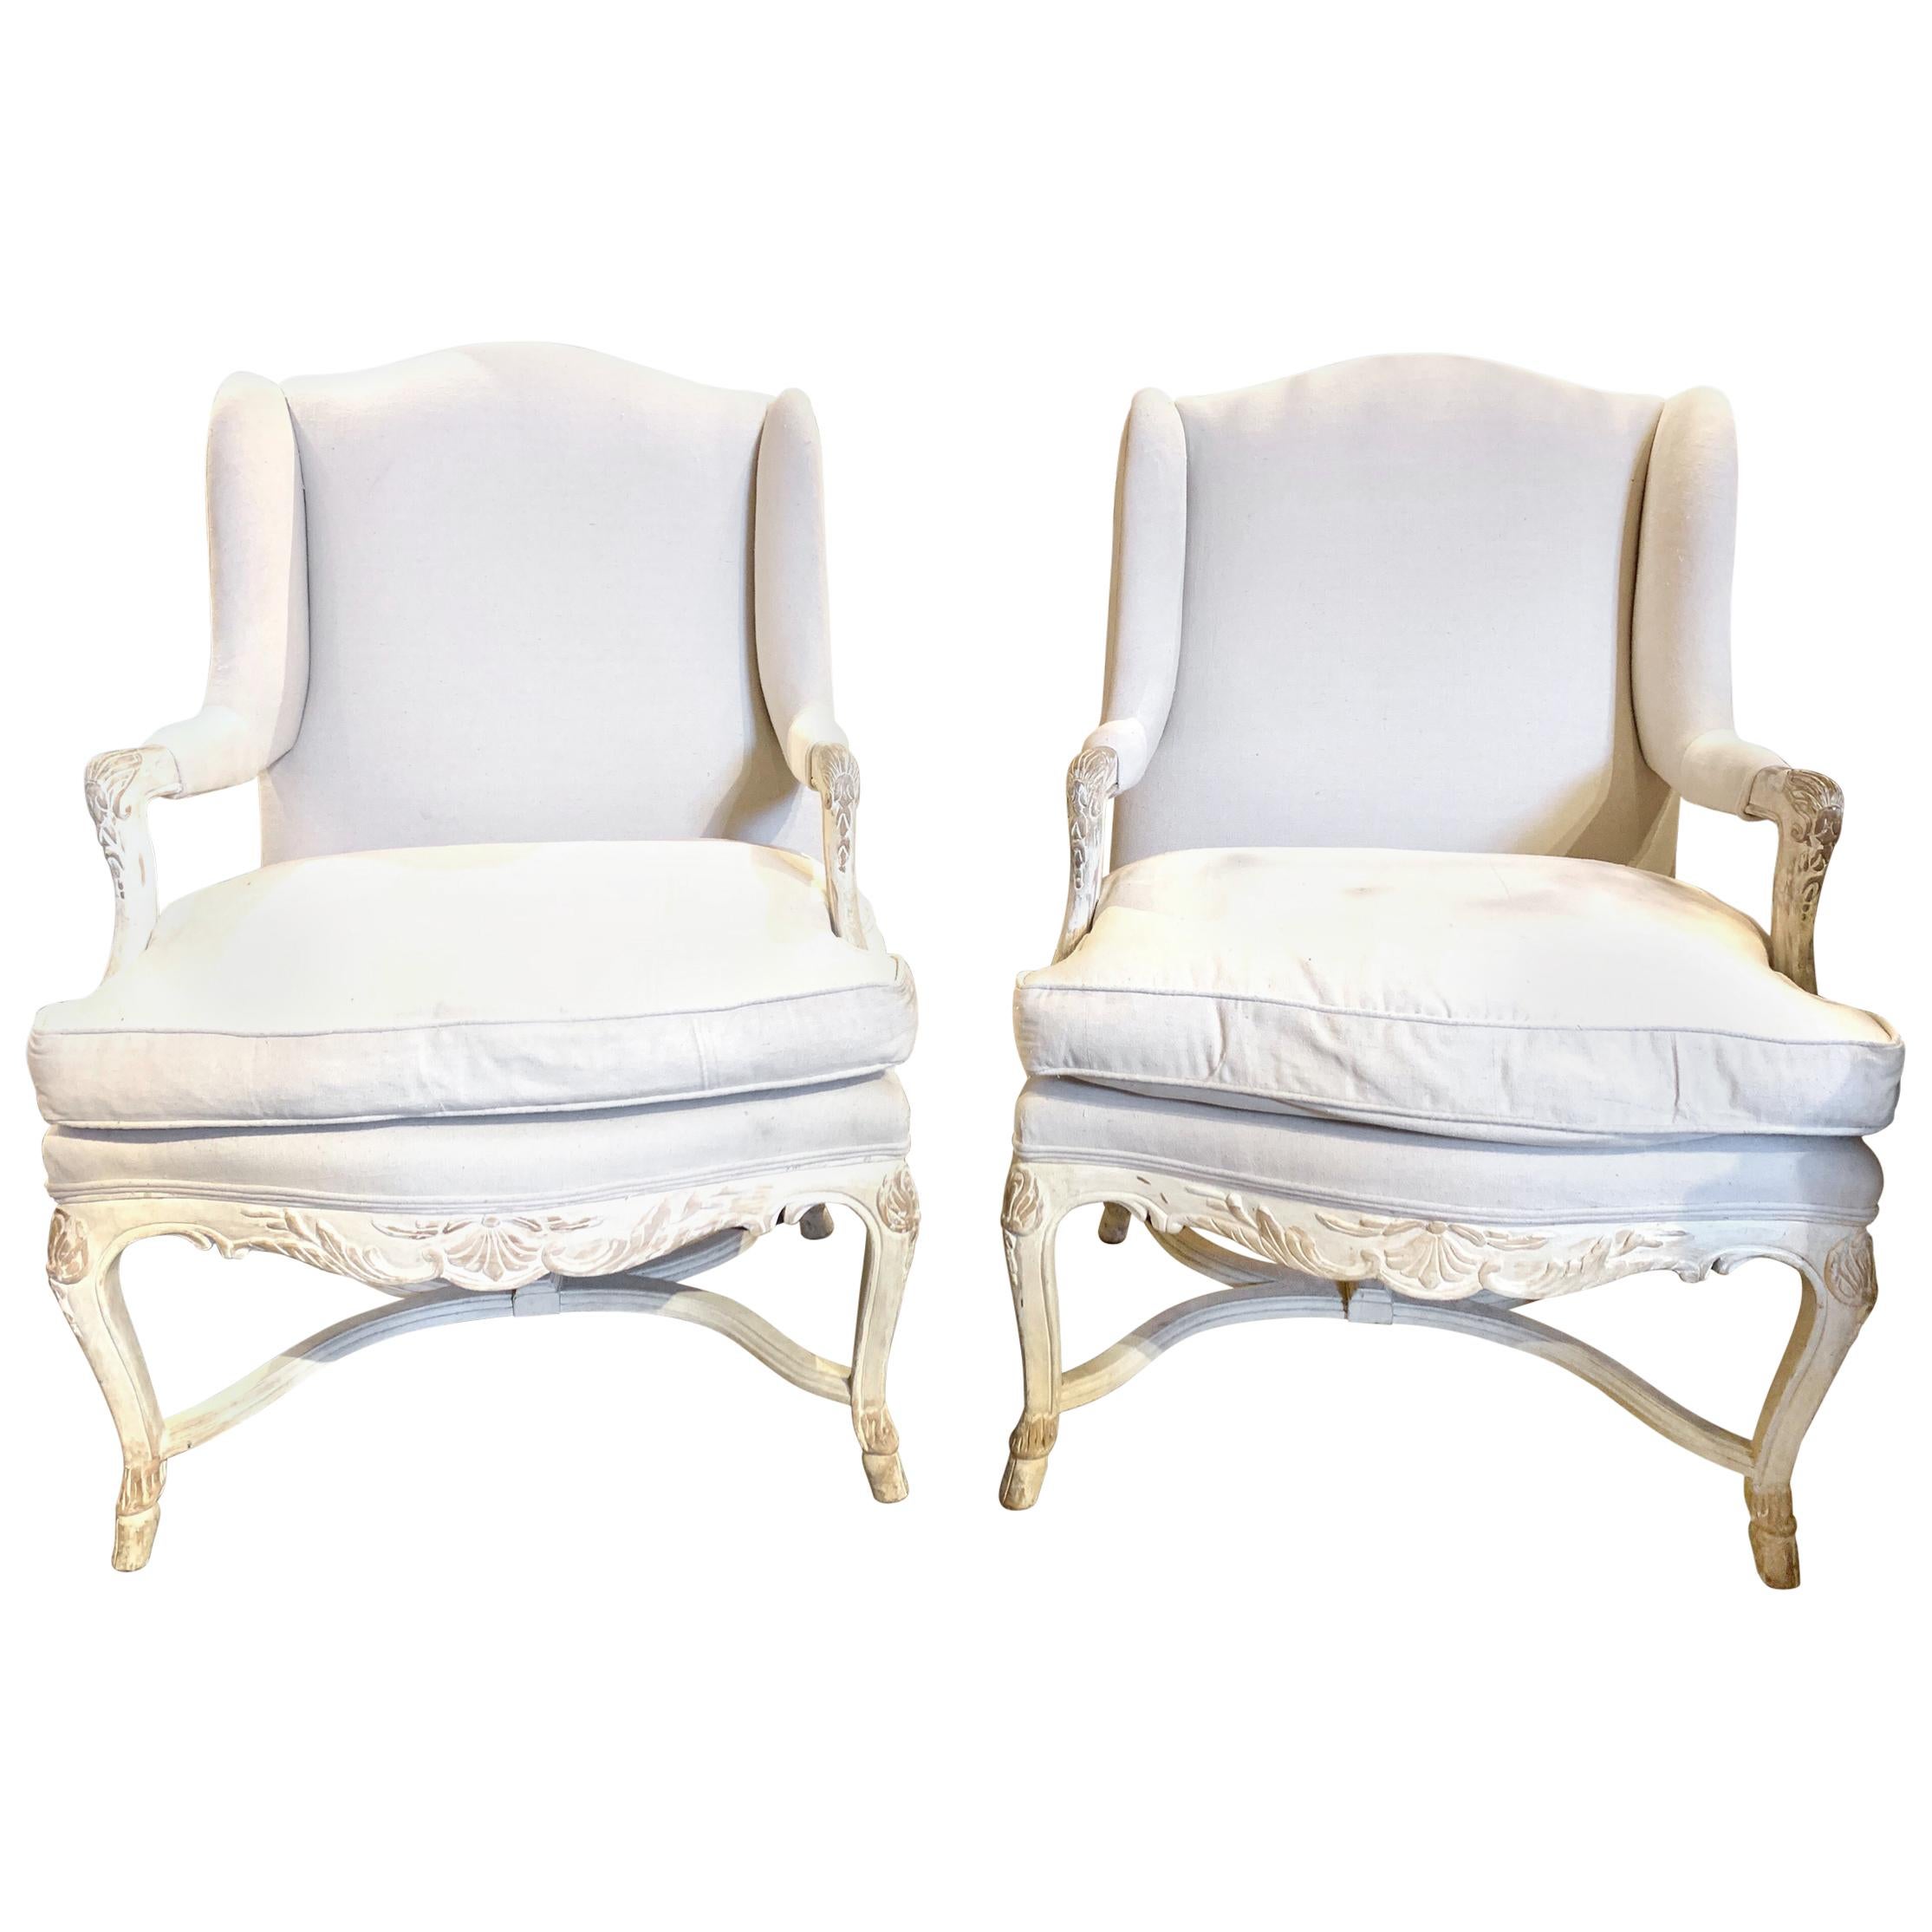 Pair of Italian Carved and White Washed Bergères